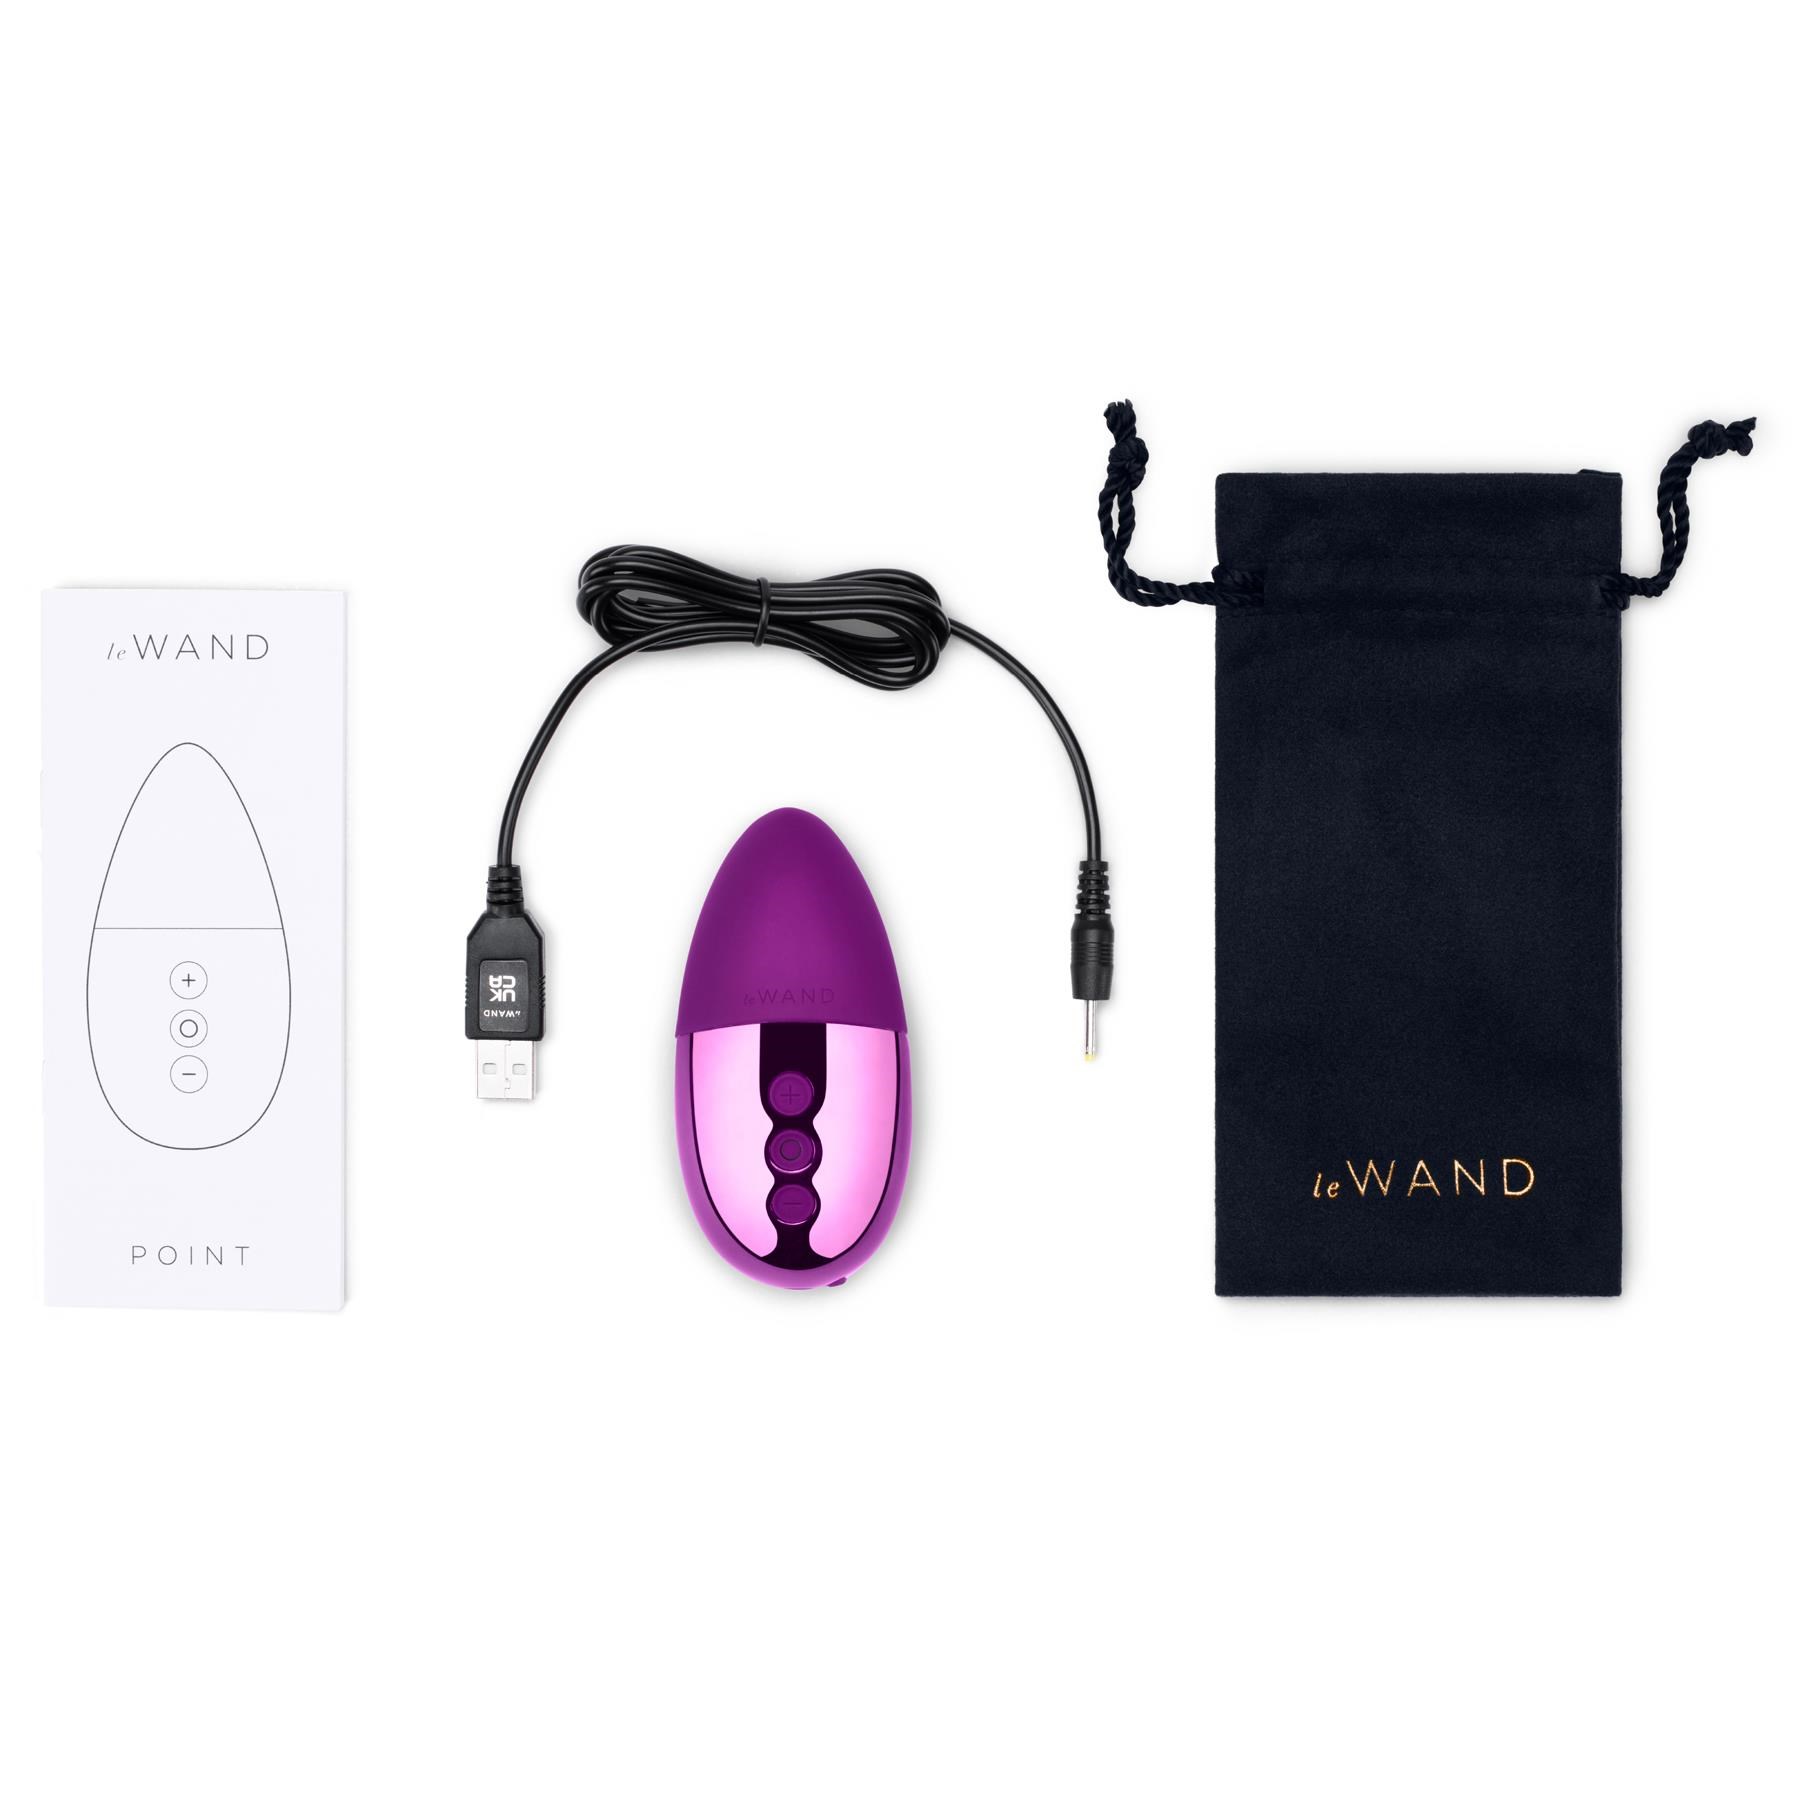 Le Wand Chrome Point Layon Vibrator - Product, Charging Cable and Storage Bag